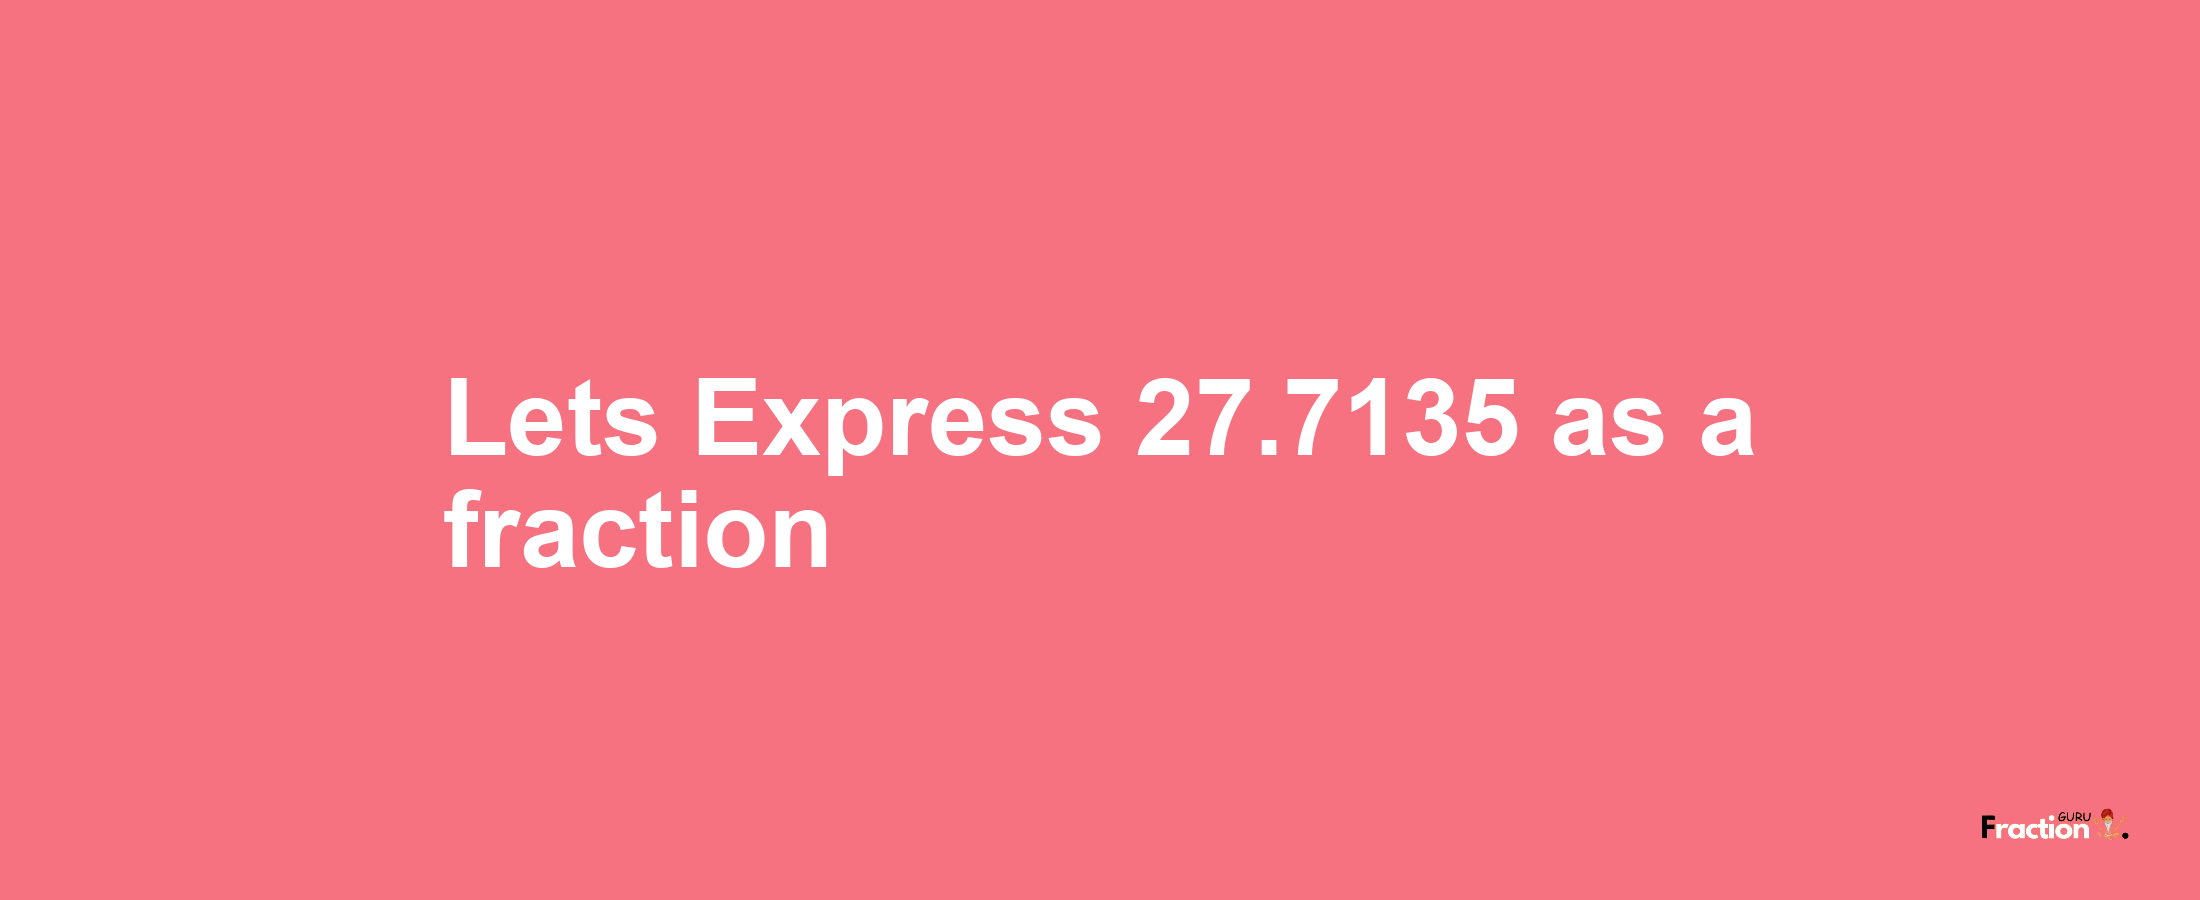 Lets Express 27.7135 as afraction